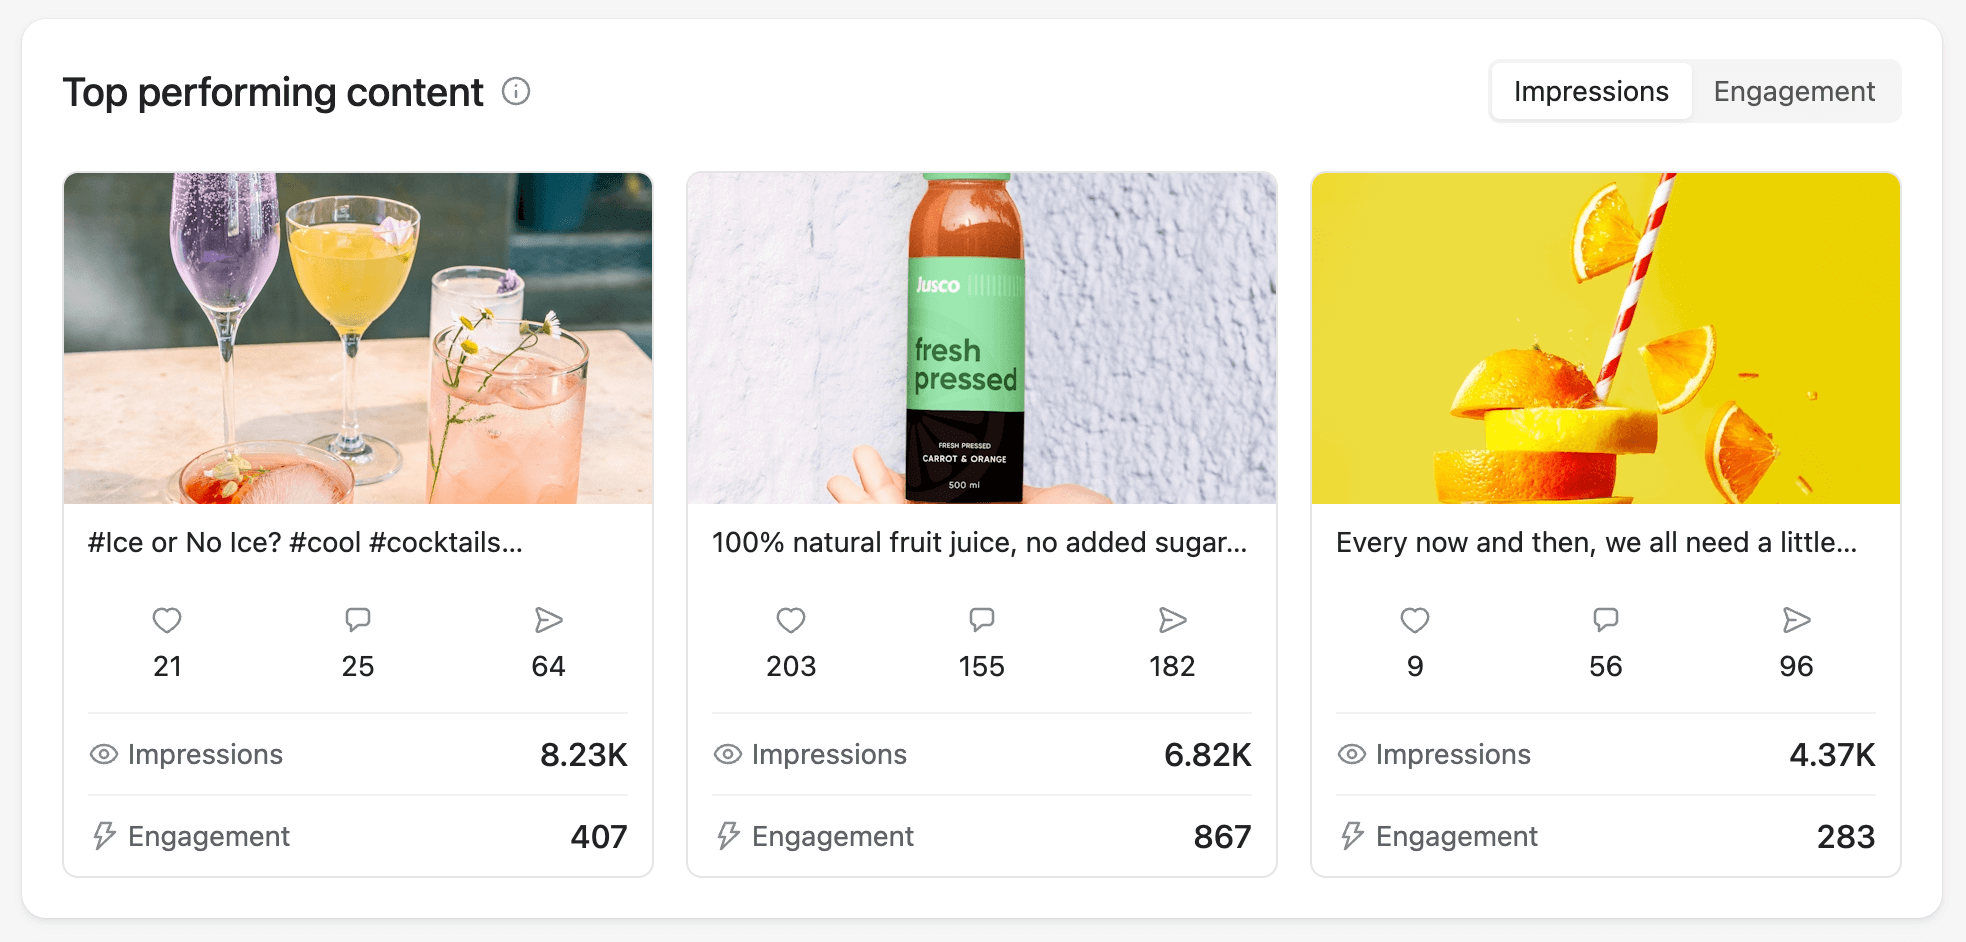 analytics dashboard showing 3 social media posts, each with image, caption, and various metrics